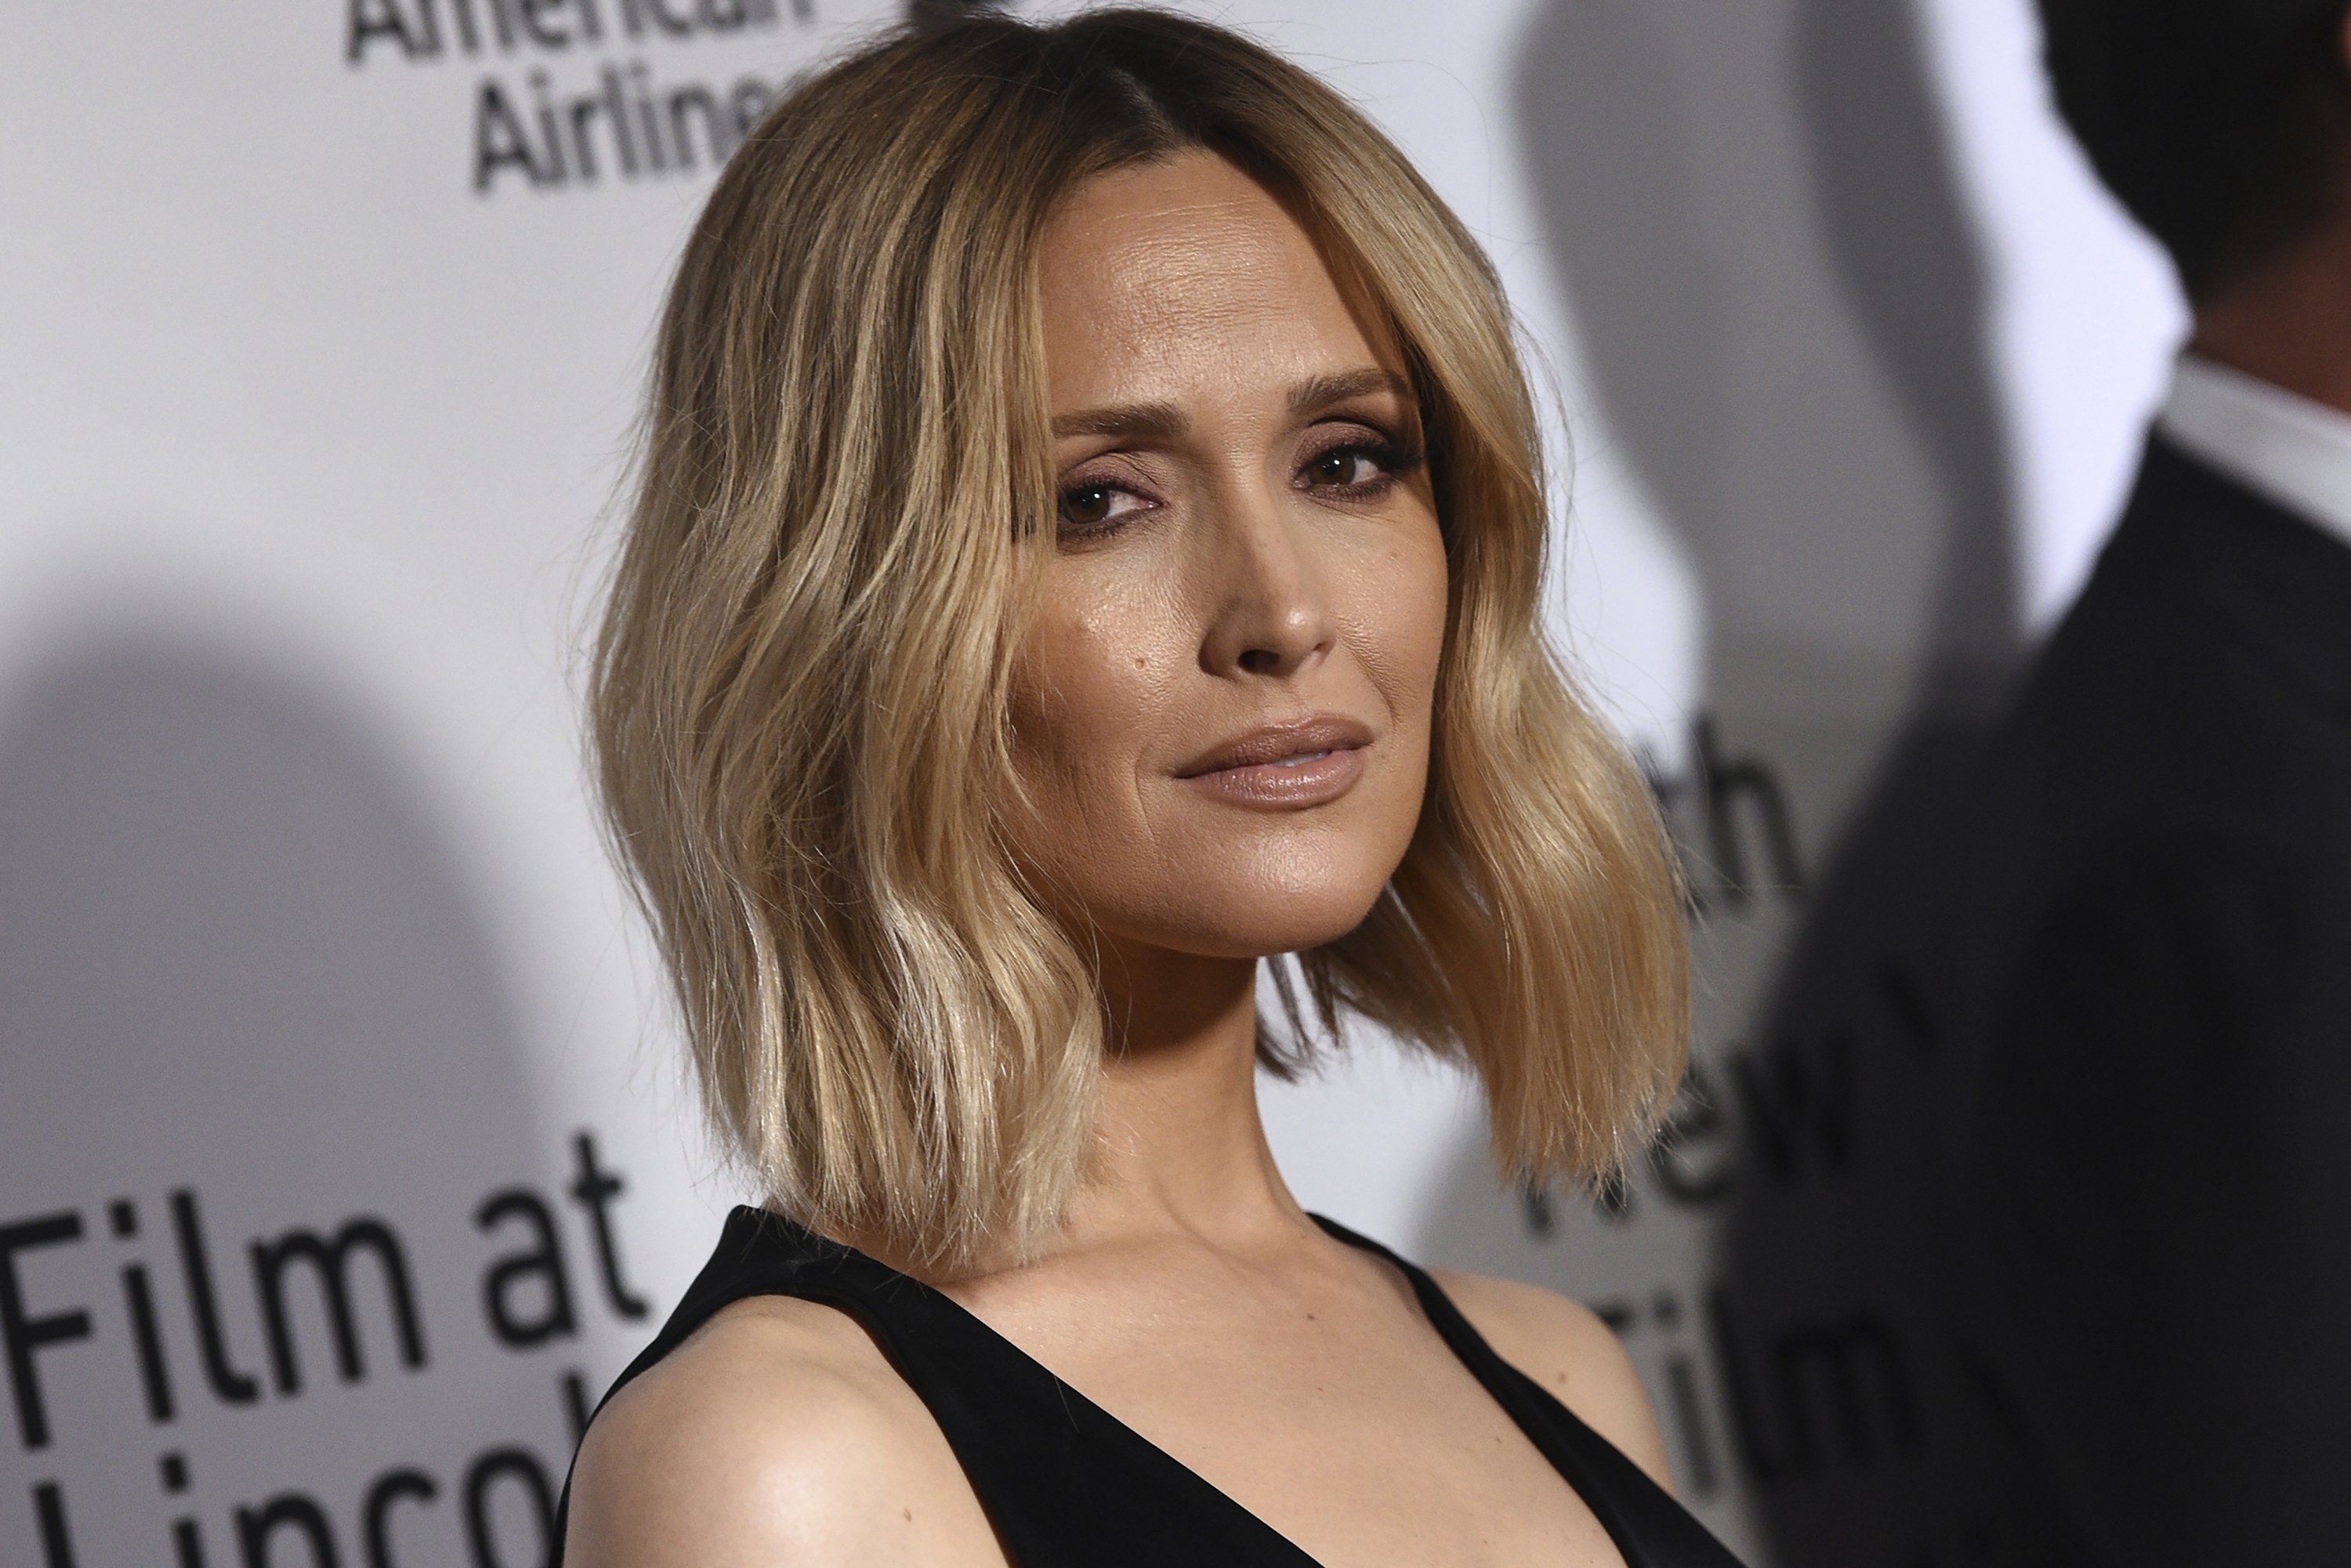 Rose Byrne attends the world premiere of "The Irishman" at Alice Tully Hall during the opening night of the 57th New York Film Festival in New York, U.S., Sept. 27, 2019. (AP Photo)